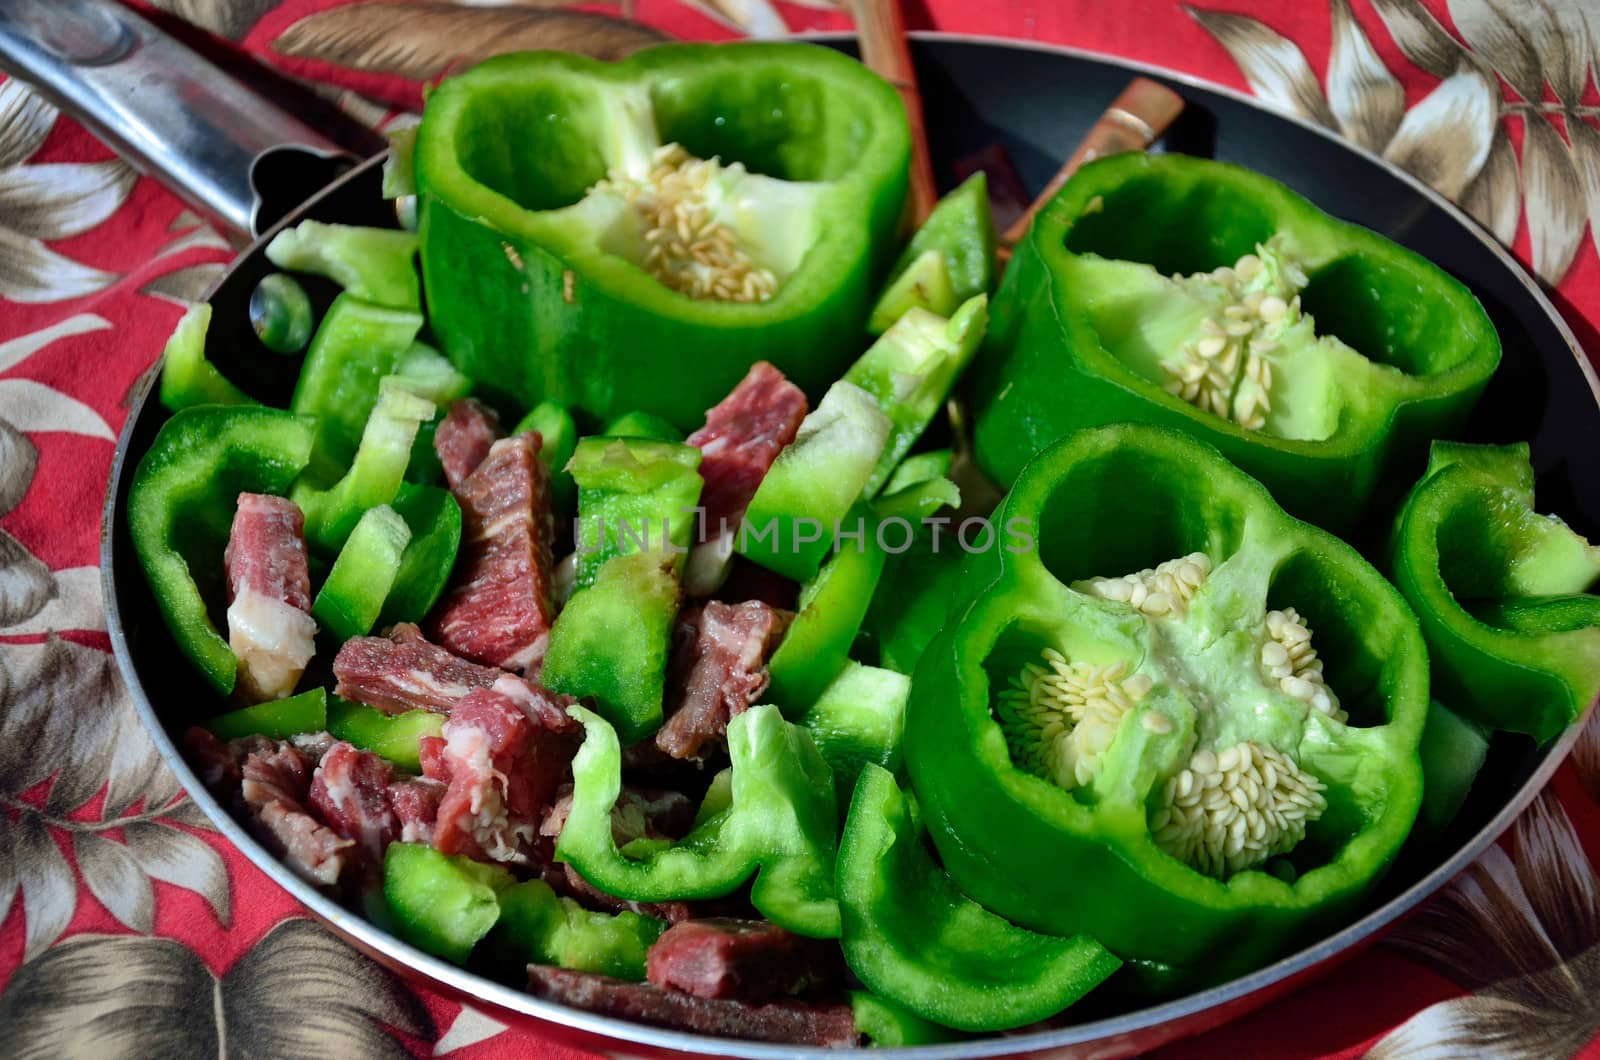 Raw beef slices and green pepper pieces make for the ingredients for pepper steak